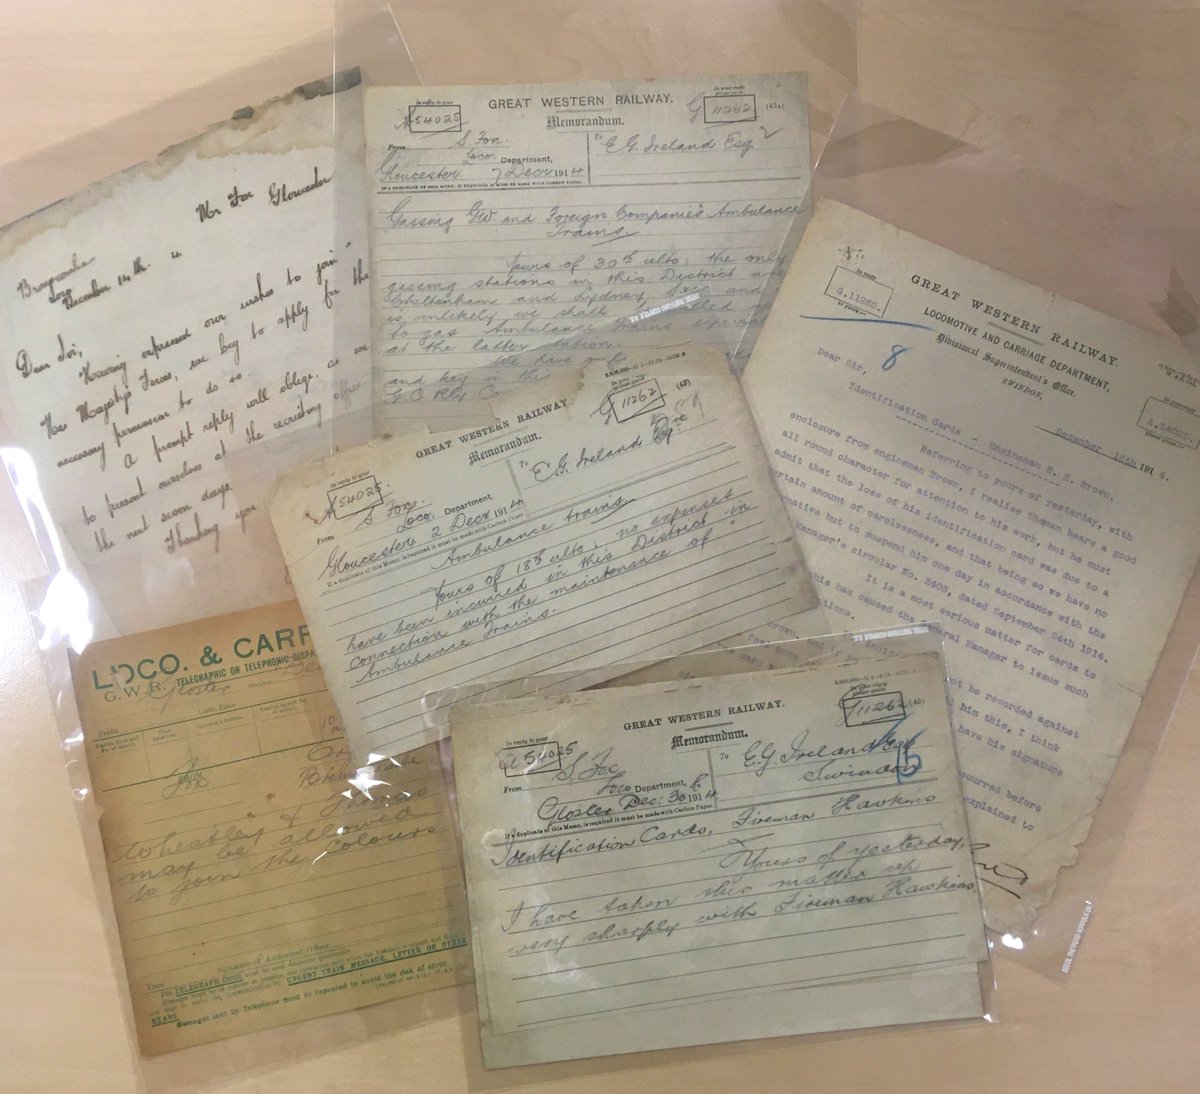 This World War I correspondence from the GWR Works gives us an insight into a #TypicalDay there in December 1914 – covering requests for permission to leave to sign up, updates on maintenance for the Ambulance trains and incidents of lost identity cards by workers #Archive30